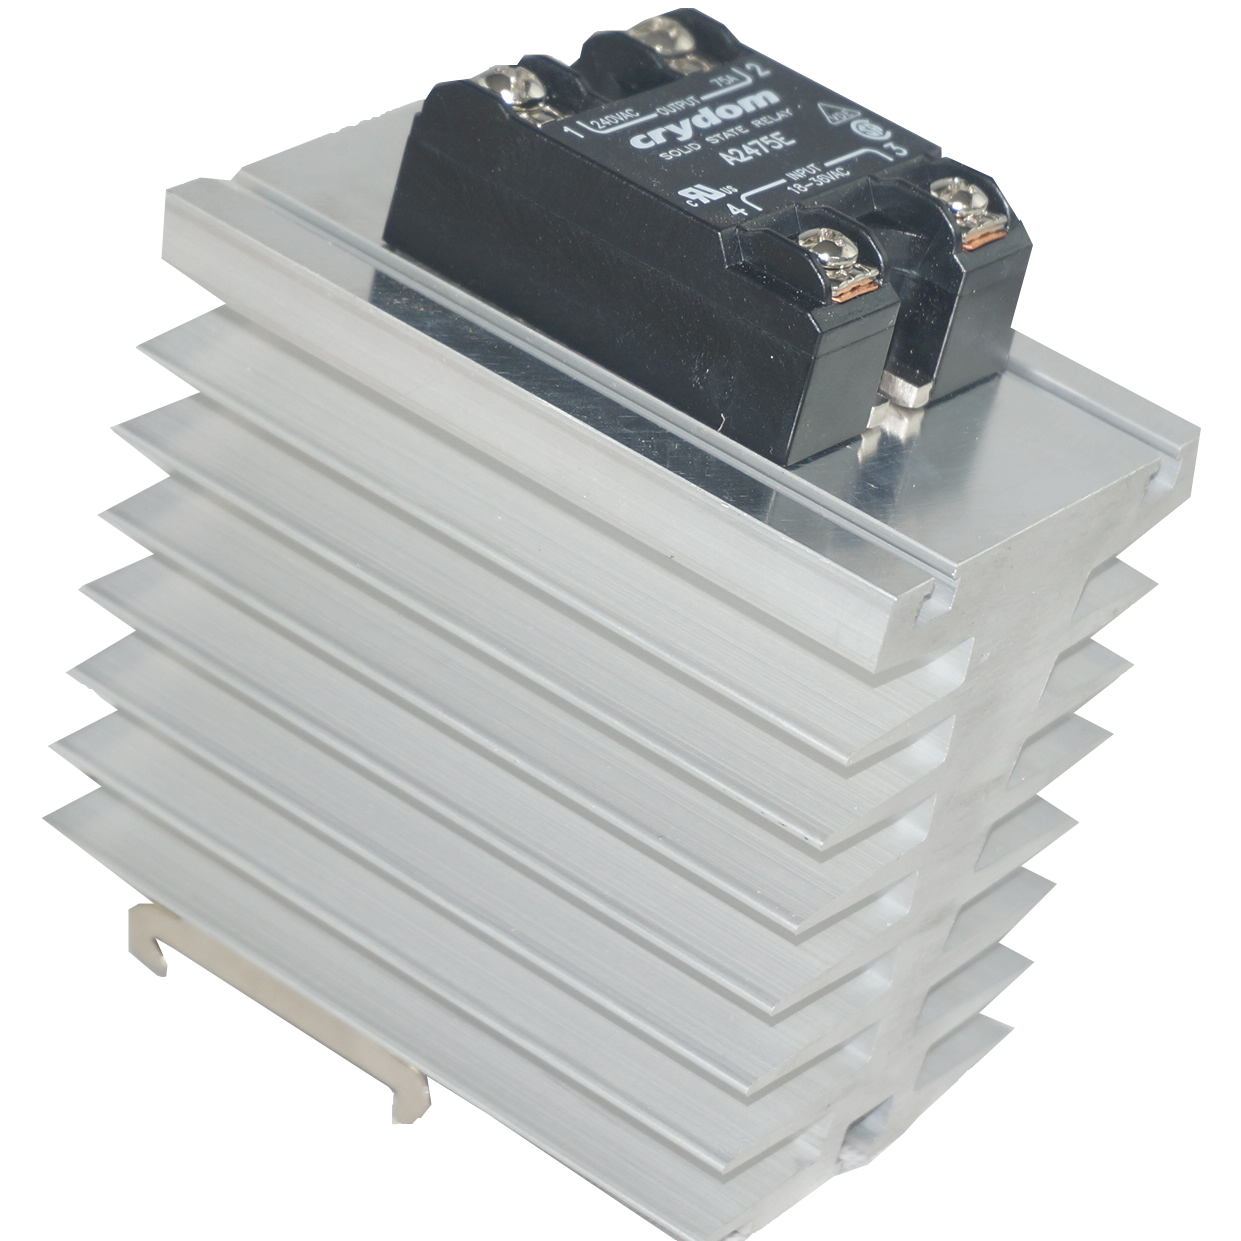 GFIN/70M-DR + A2450G, Din Rail Mount Solid State Relay with Heatsink, 24VAC Control Input, 24-280VAC Output, 34 Amps @ 40 Deg C ambient, LED Indicator